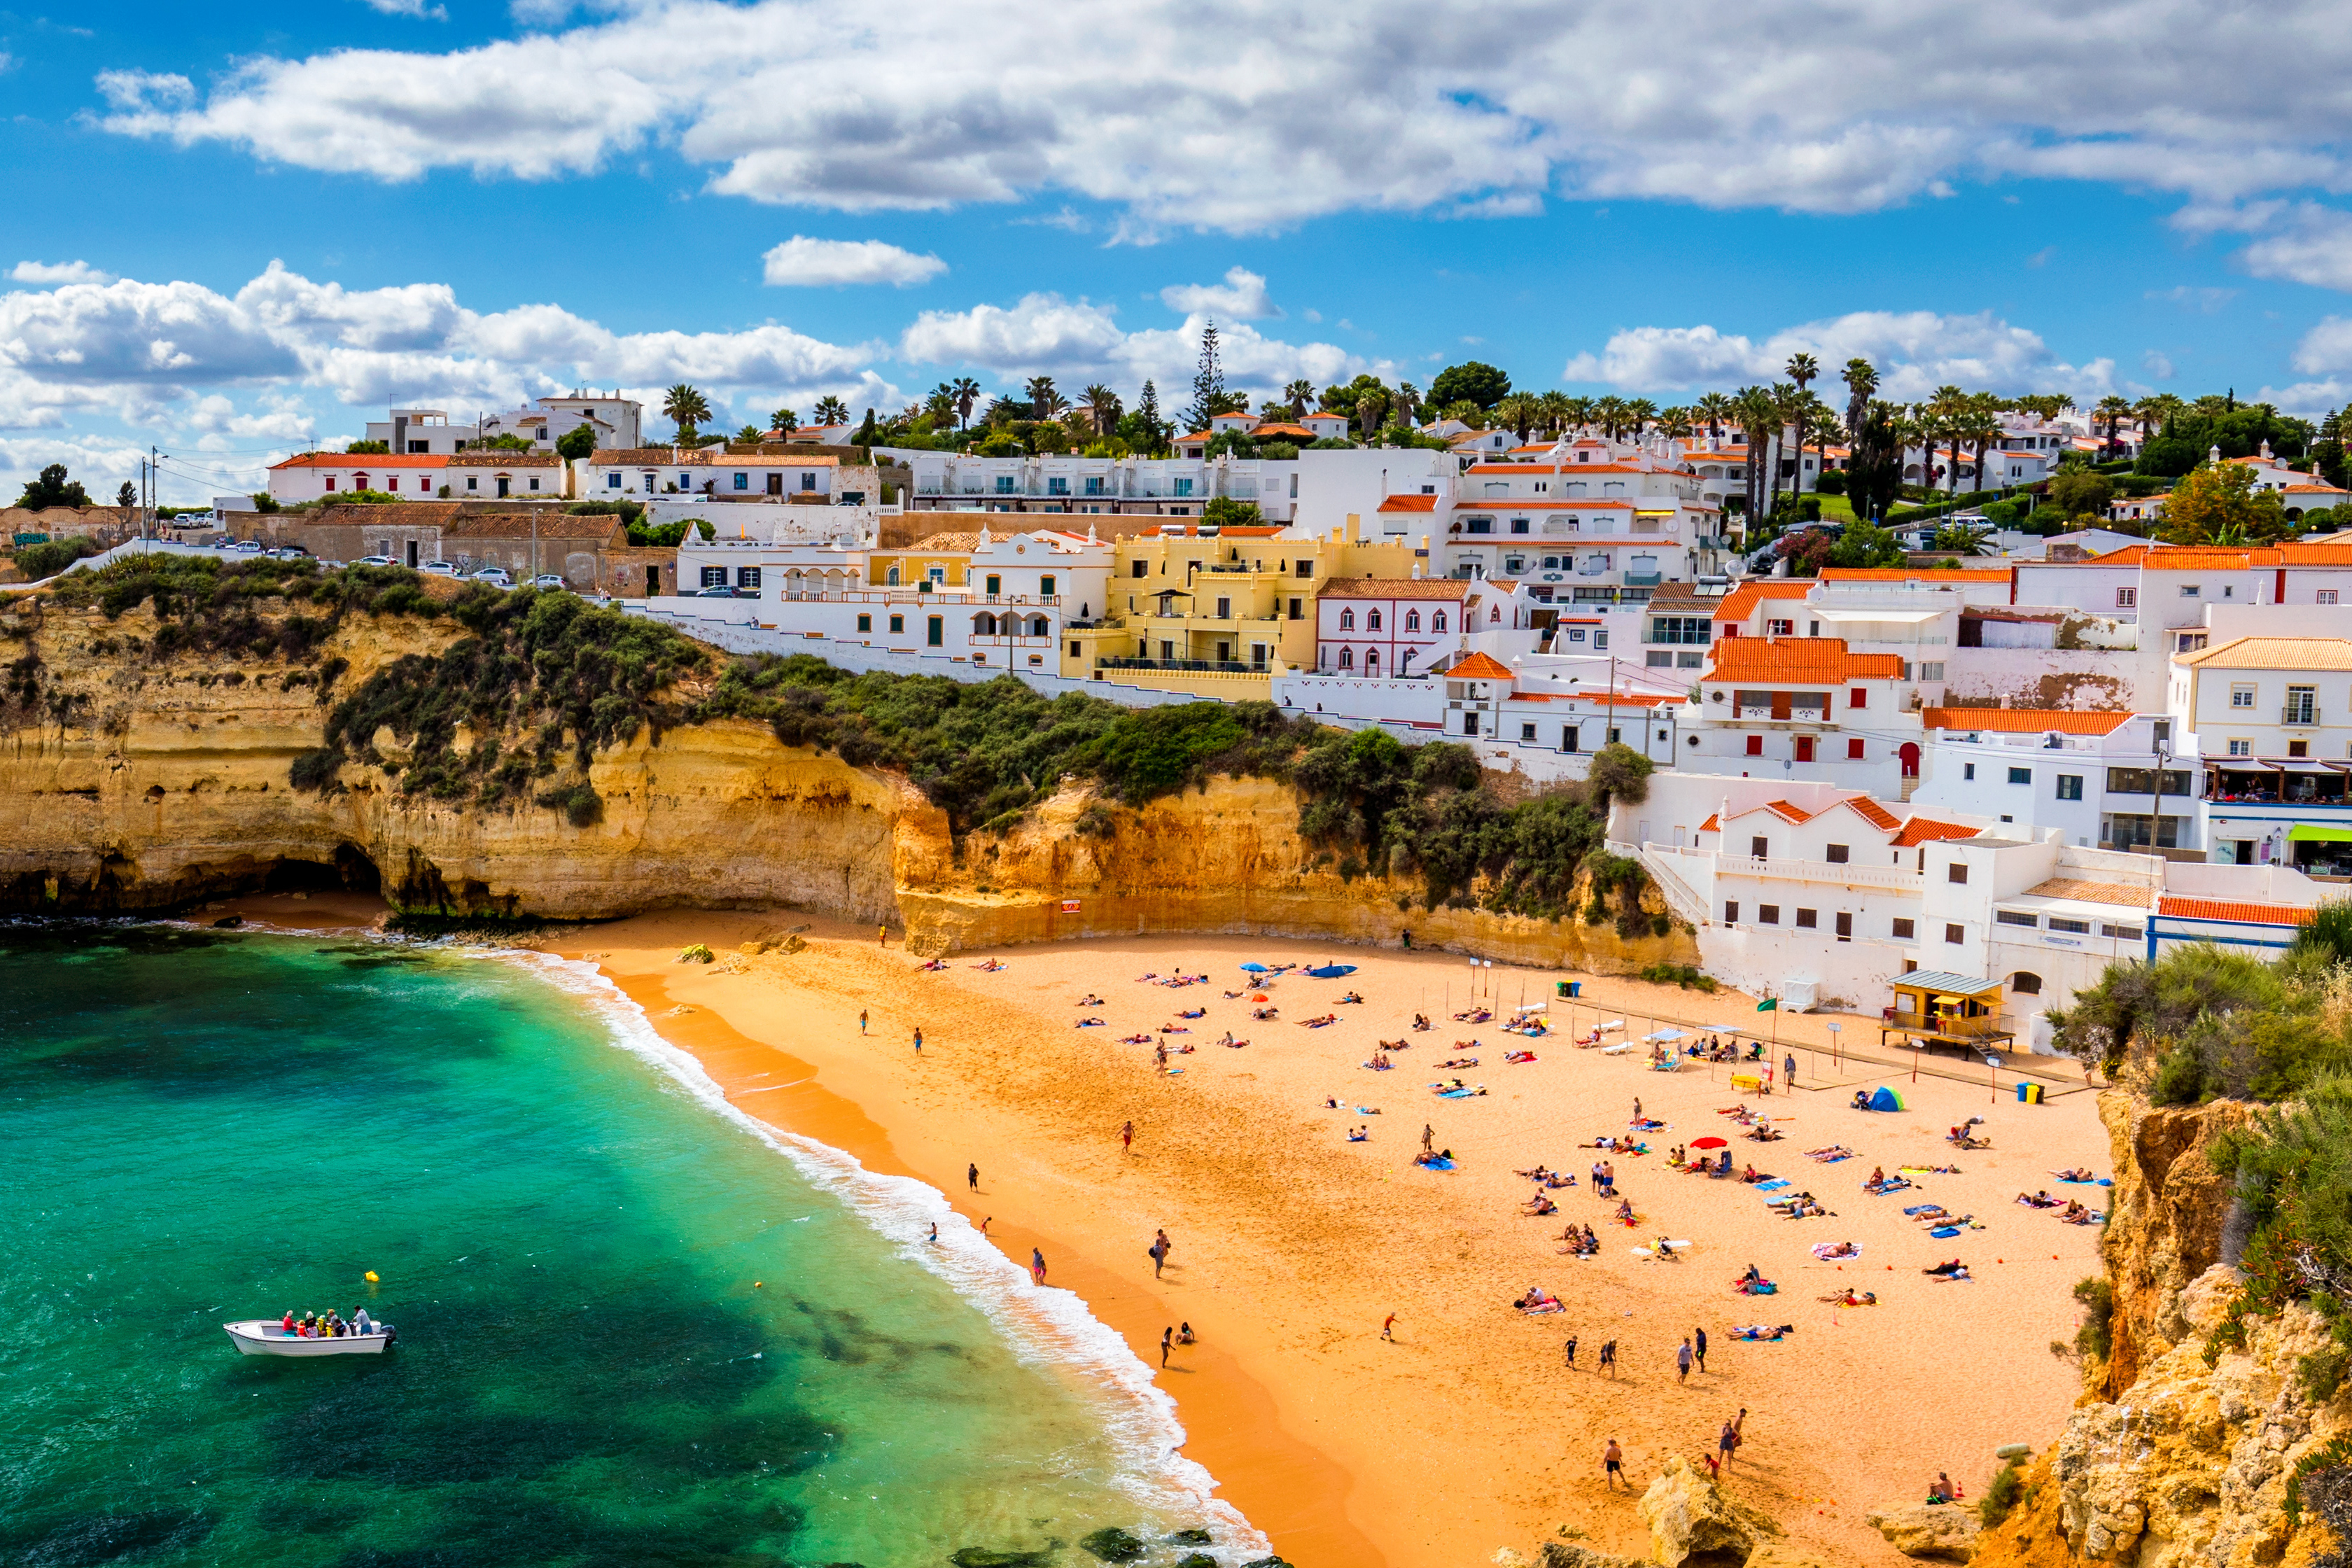 Portuguese coastal property that can be purchased through the Golden Visa program